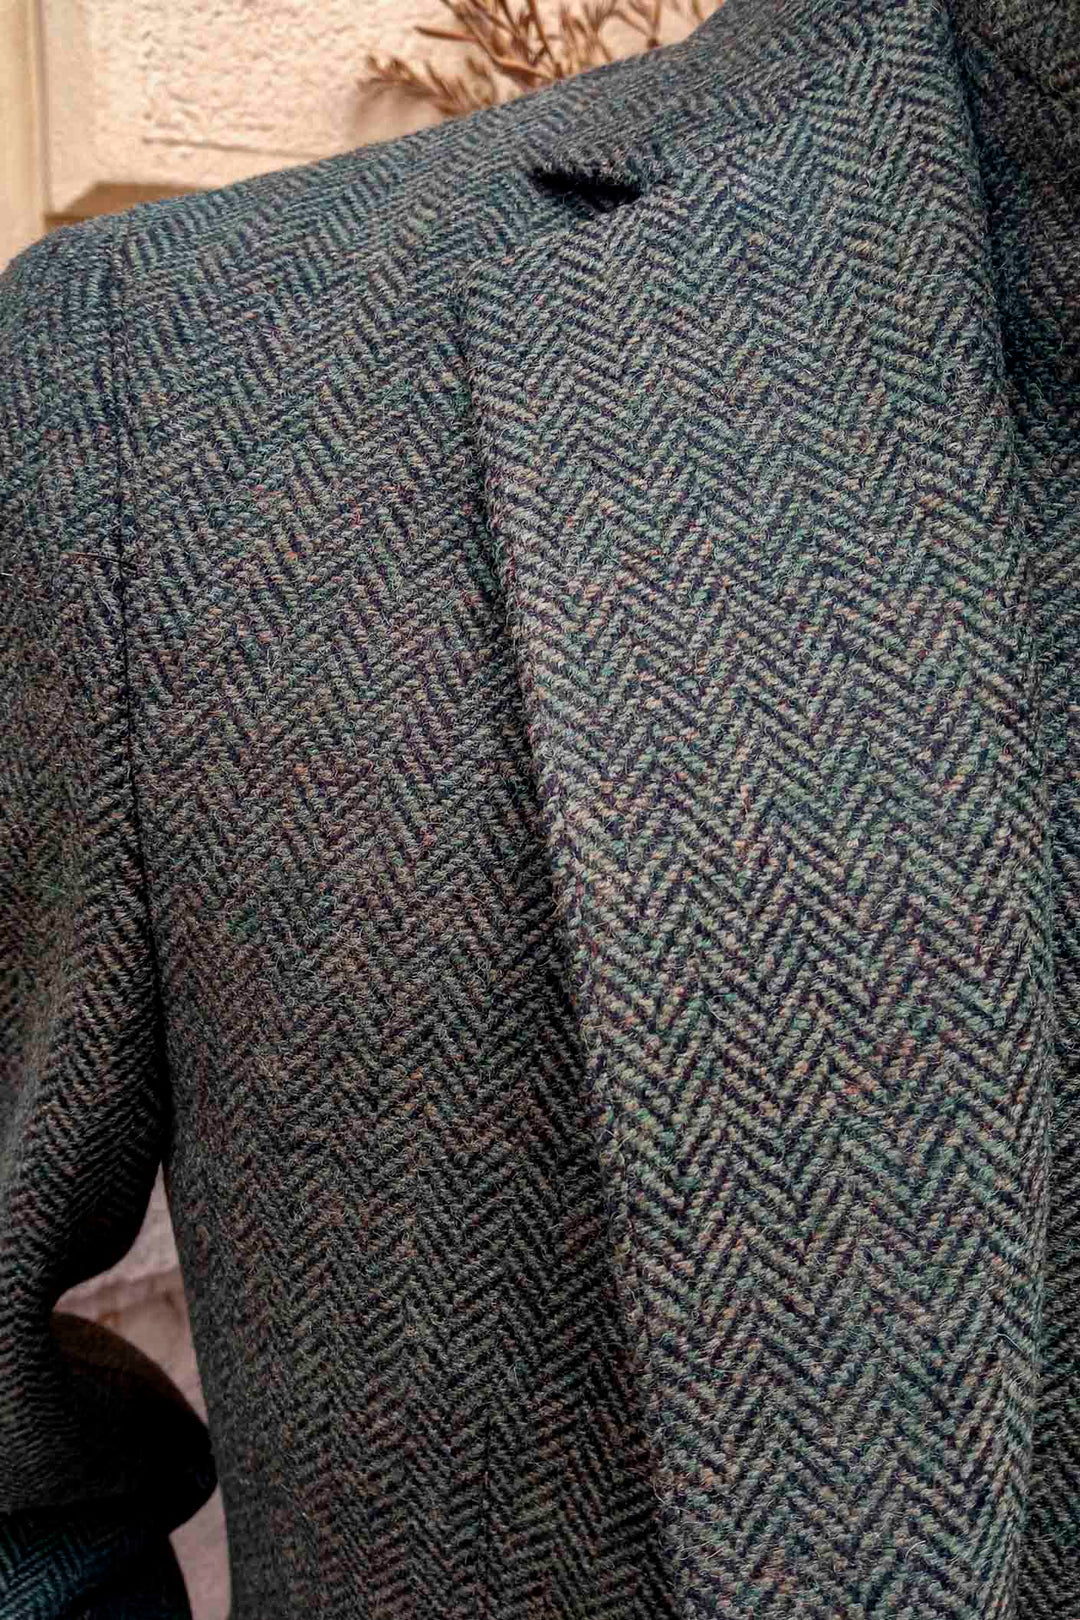 Bistro Green Herringbone Blazer with Bistro and Horn Buttons